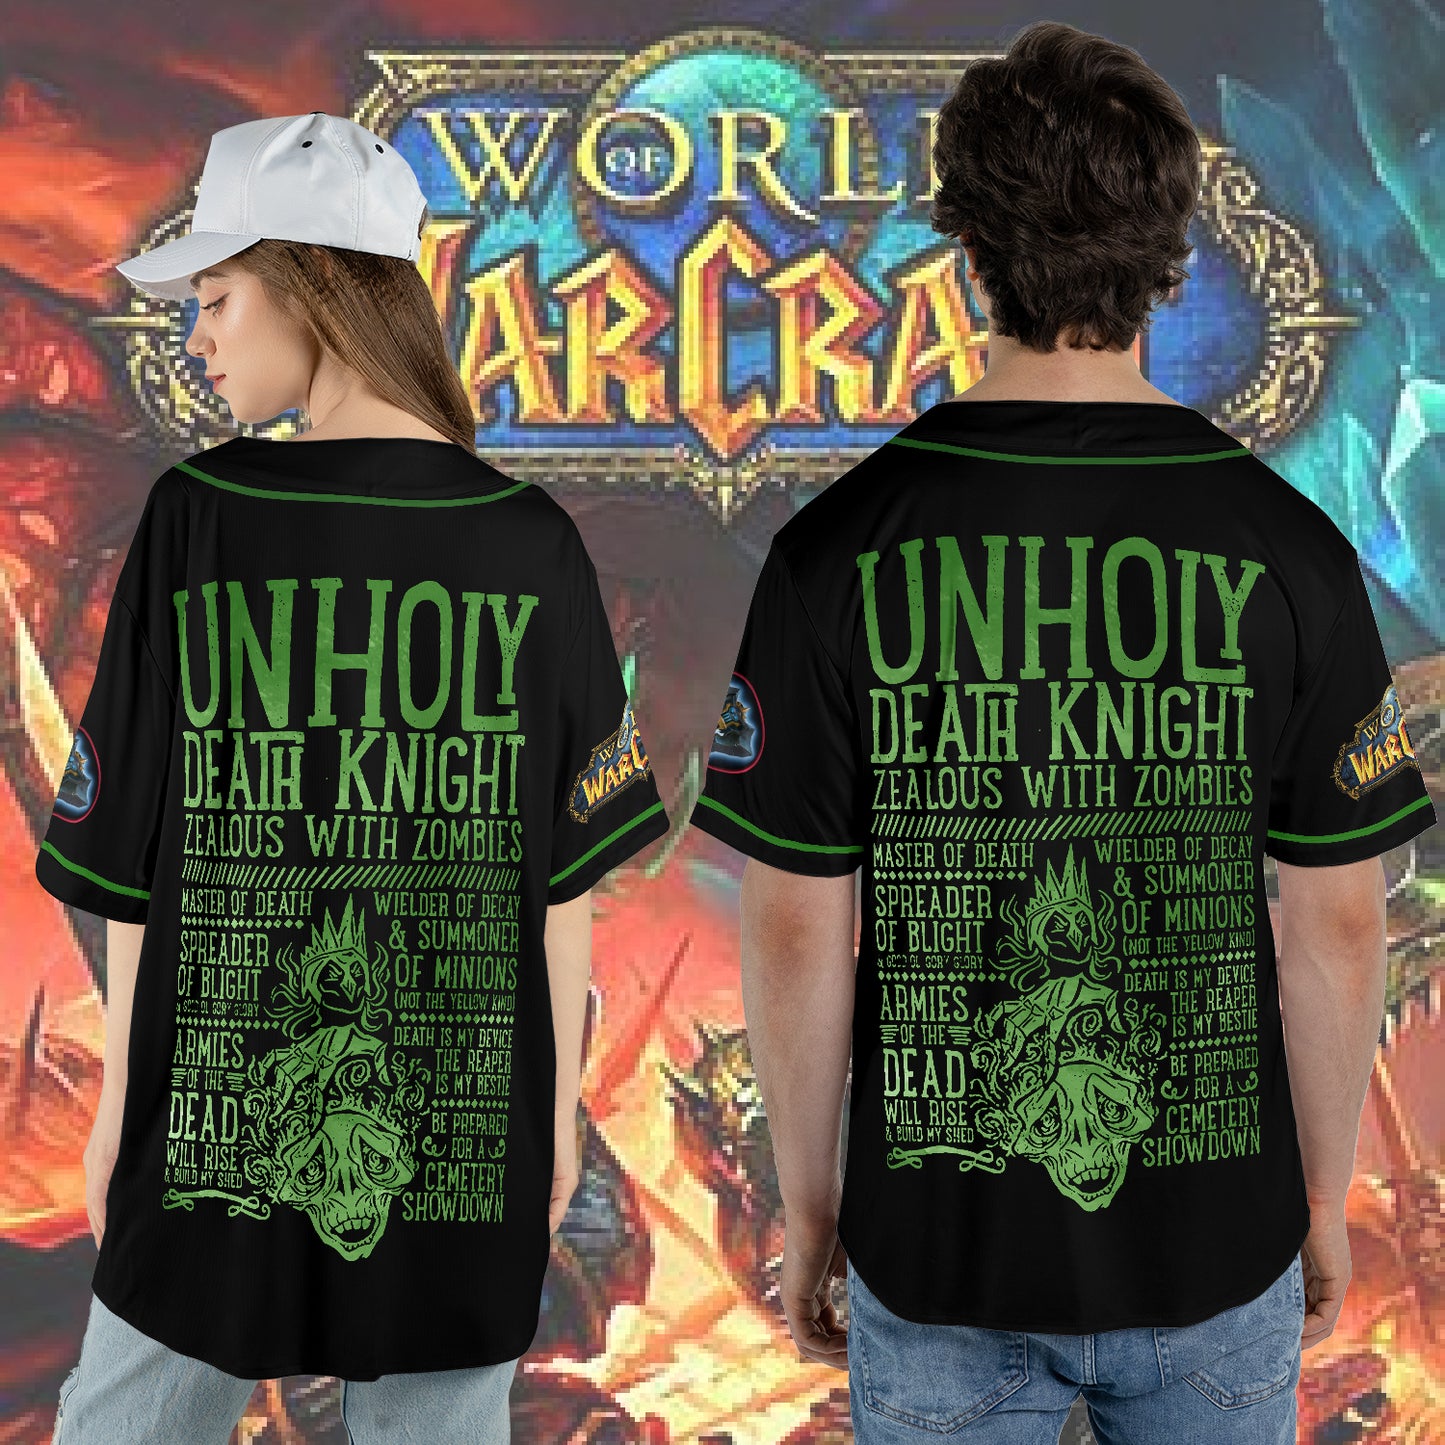 Wow Class Unholy Death Knight Guide AOP Baseball Jersey Without Piping